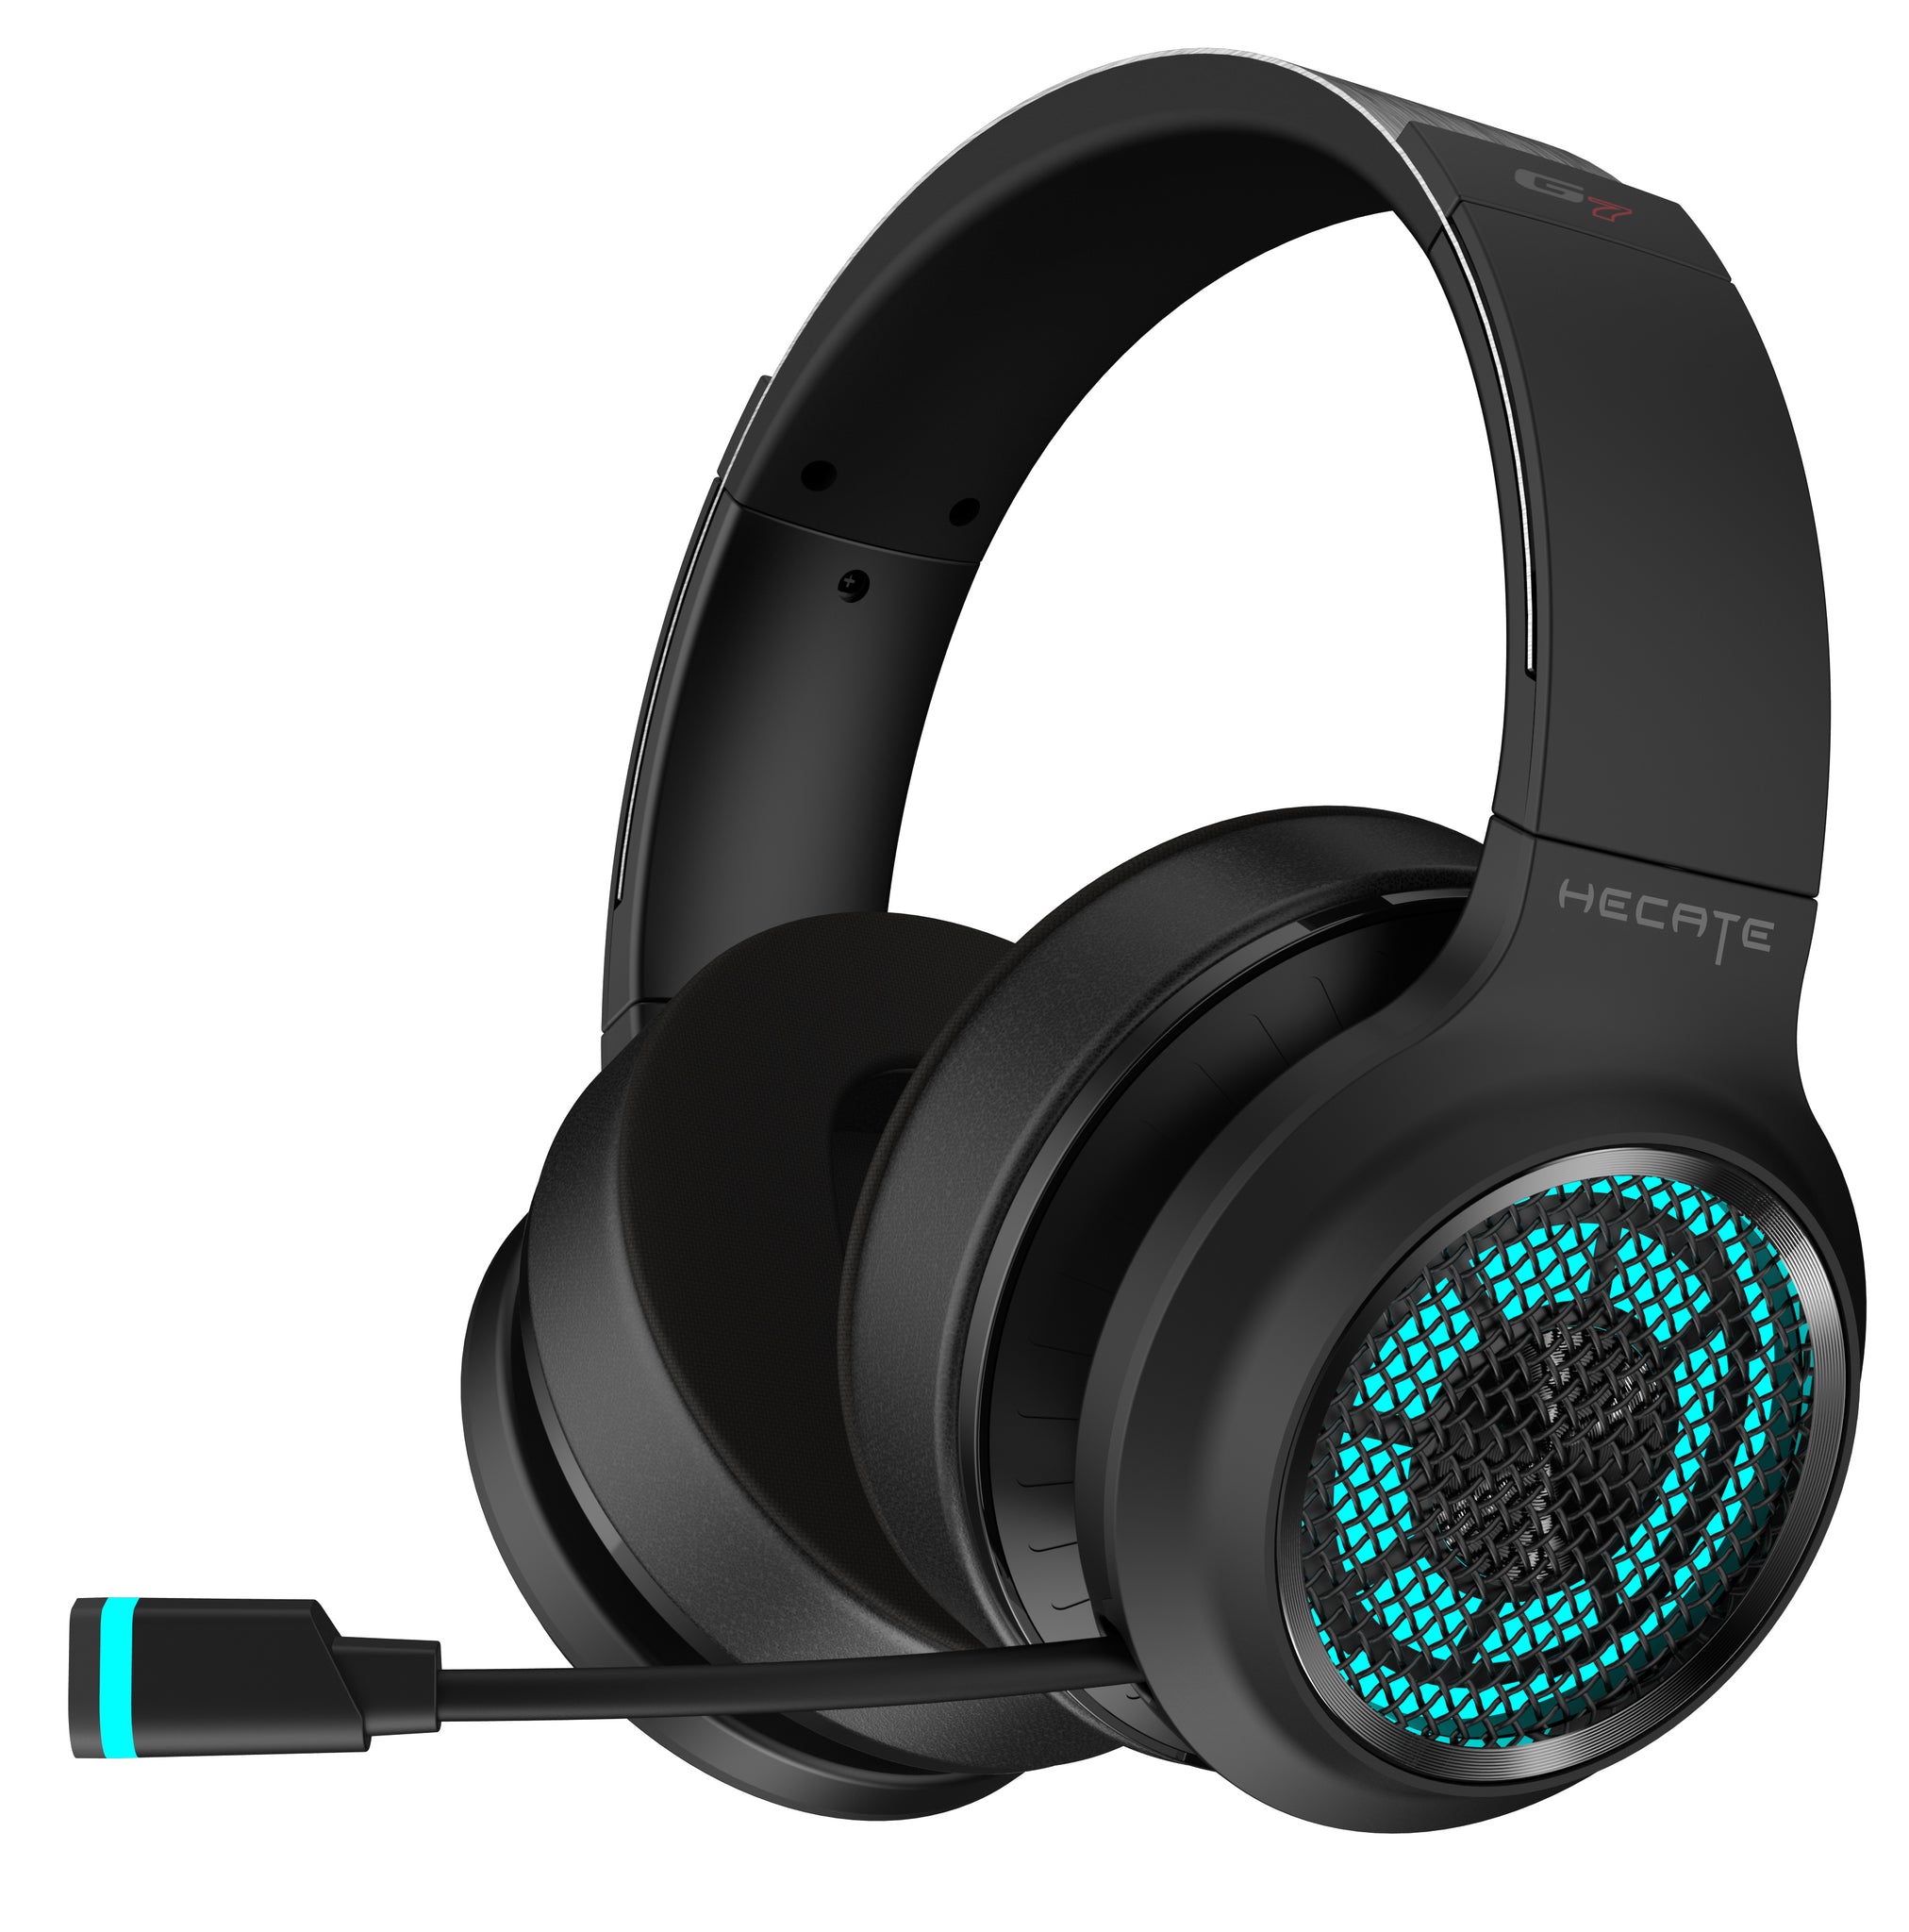 Edifier G7 Professional 7.1  Surround Sound Hi-Res USB Gaming Headset With Microphone - RGB Lighting